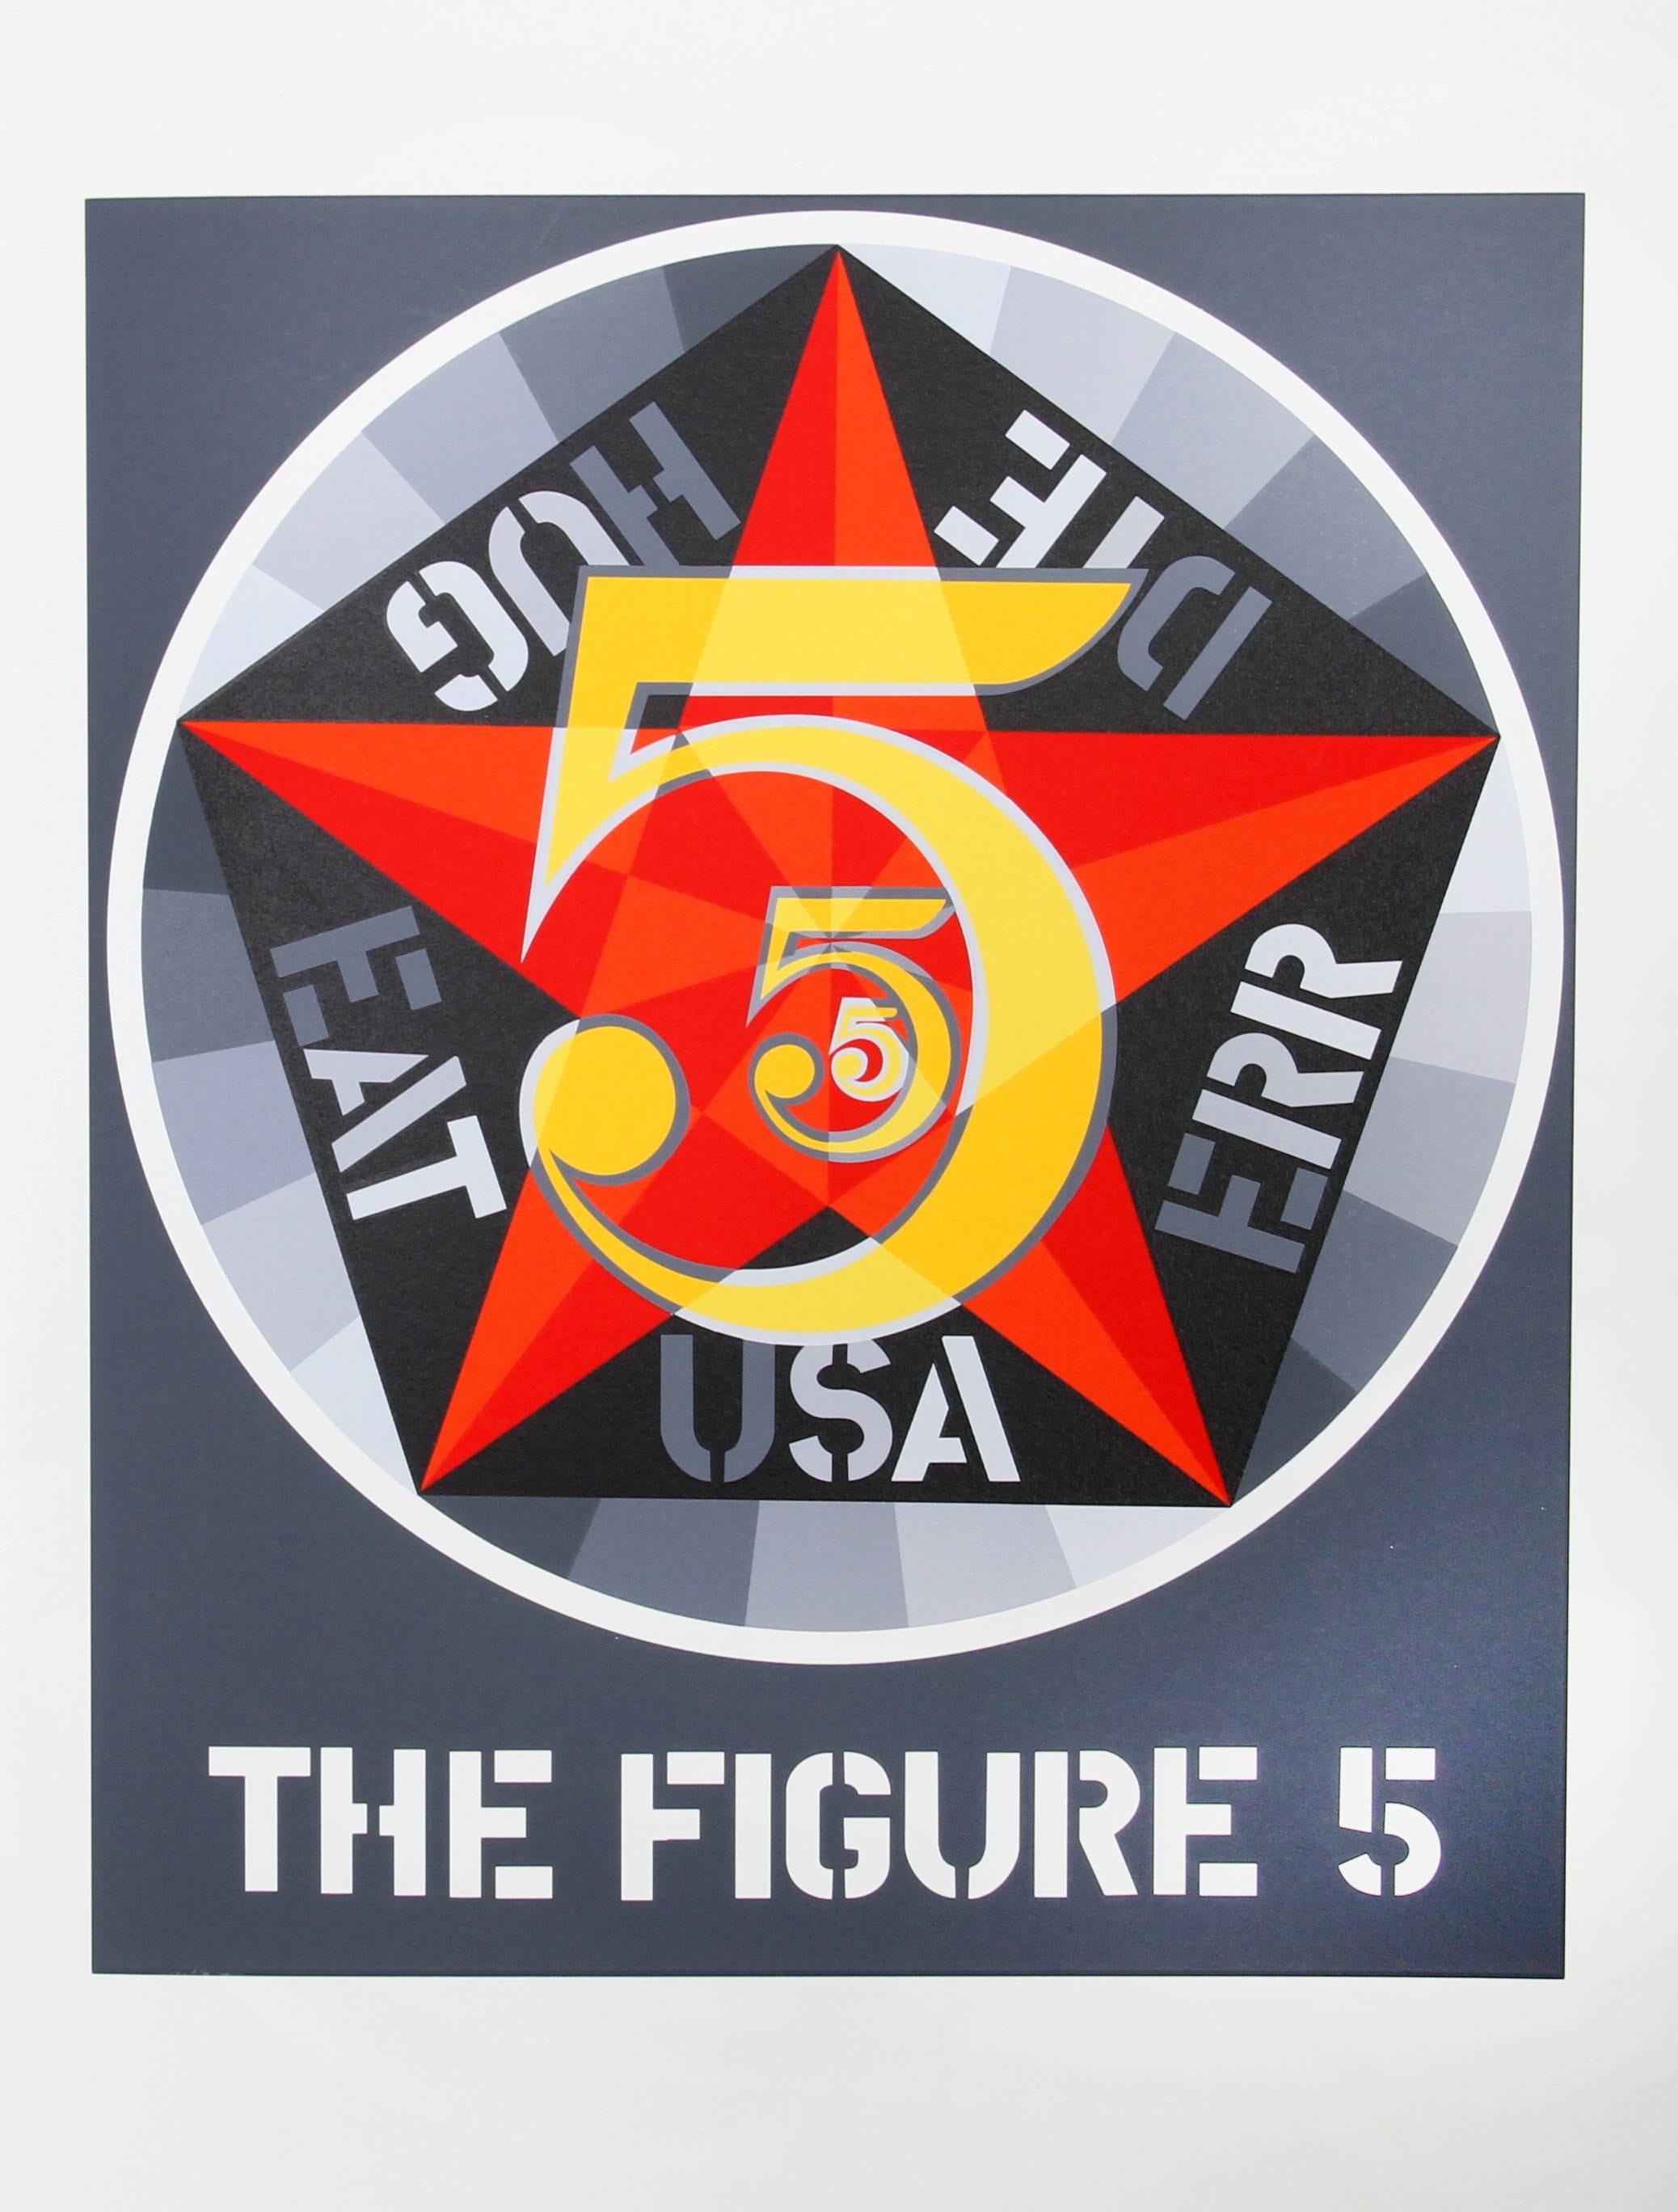 Artist: Robert Indiana, American (1928 - 2018)
Title: The Figure 5 from the American Dream Portfolio
Year: 1963 (1997)
Medium: Screenprint on wove paper
Edition: 395
Image Size: 16.75 x 14 inches
Size: 22 in. x 17 in. (55.88 cm x 43.18 cm)

Printed